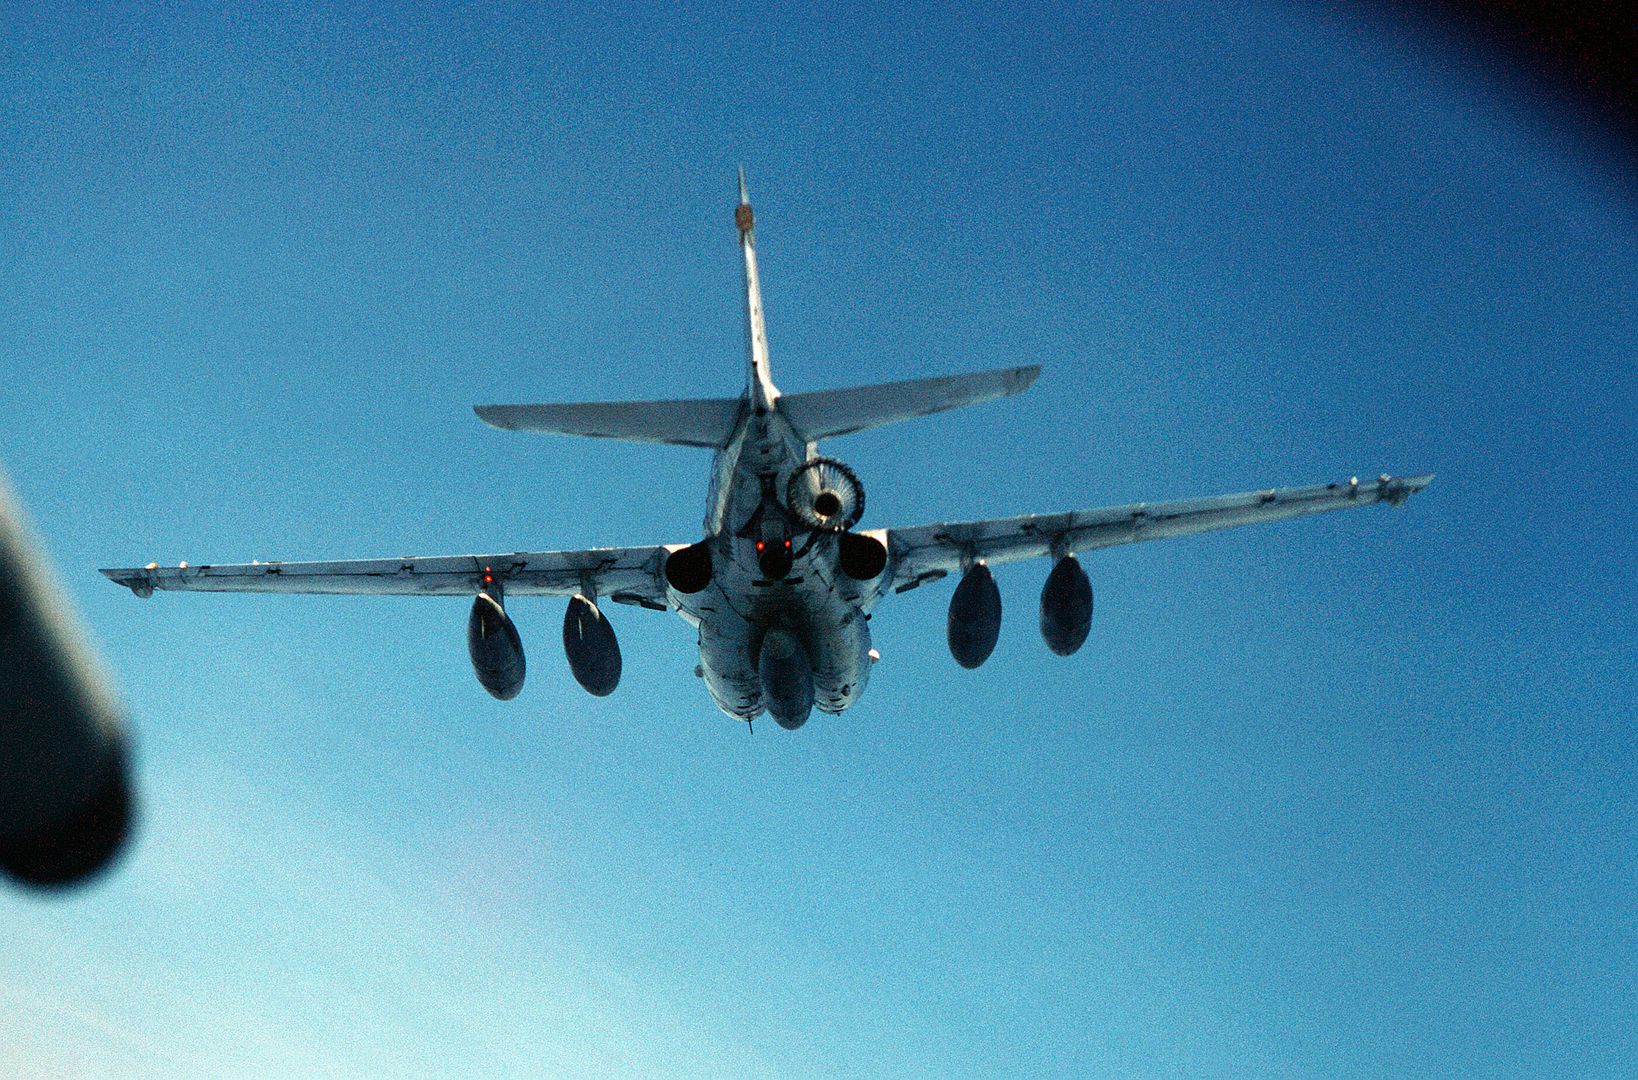 An Attack Squadron 176 KA 6D Intruder Aircraft Deploys Its Refueling Drogue For An Approaching Aircraft During A Flight Off Of The Aircraft Carrier USS FORRESTAL